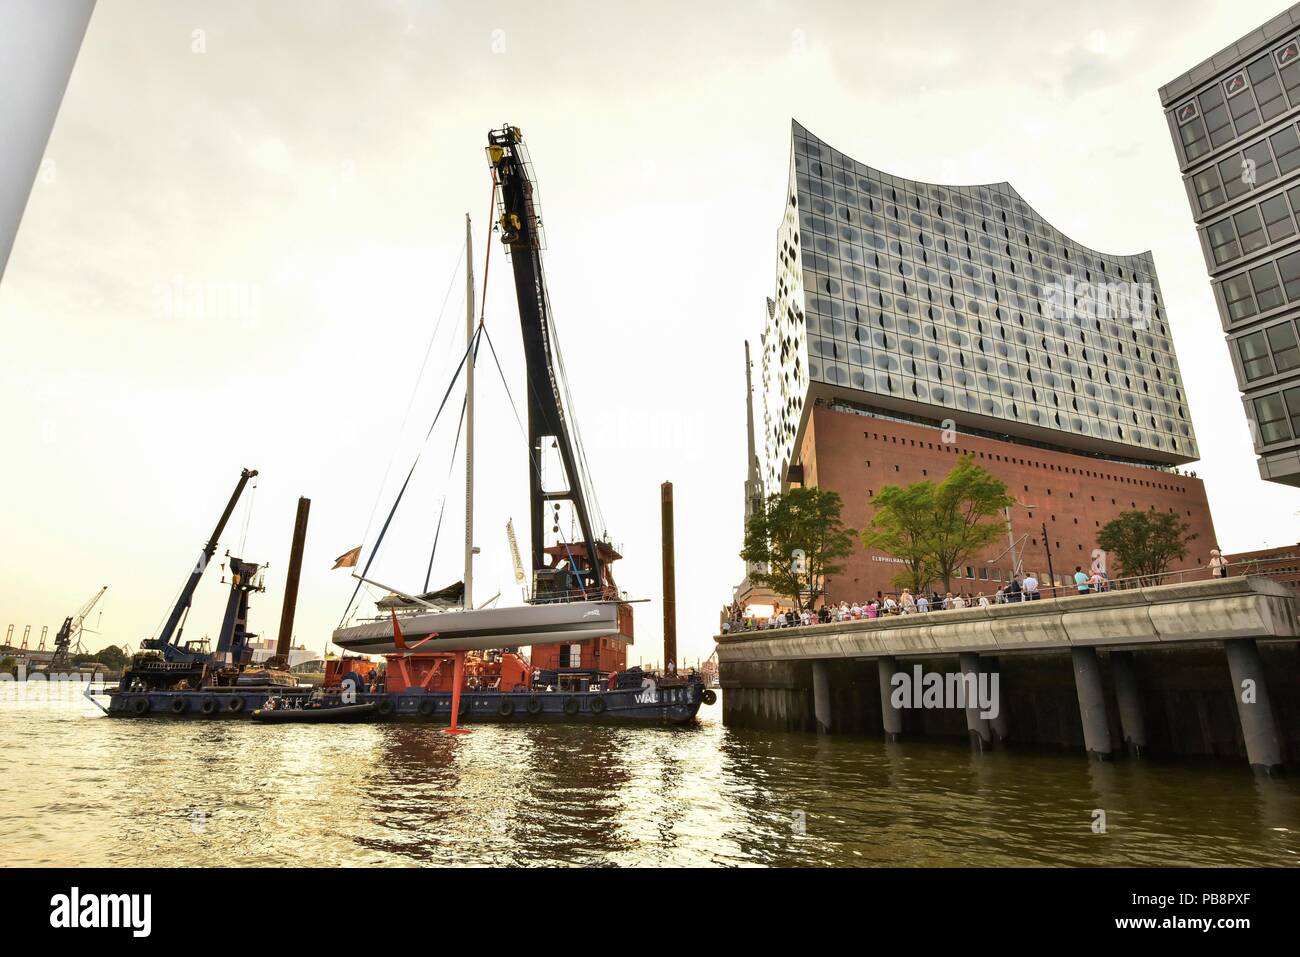 The Malizia in front of the Elbphilharmonie during the press event at the Brasserie Carls at the Elbphilharmonie on Wednesday, July 25, 2018 in Hamburg | usage worldwide Stock Photo